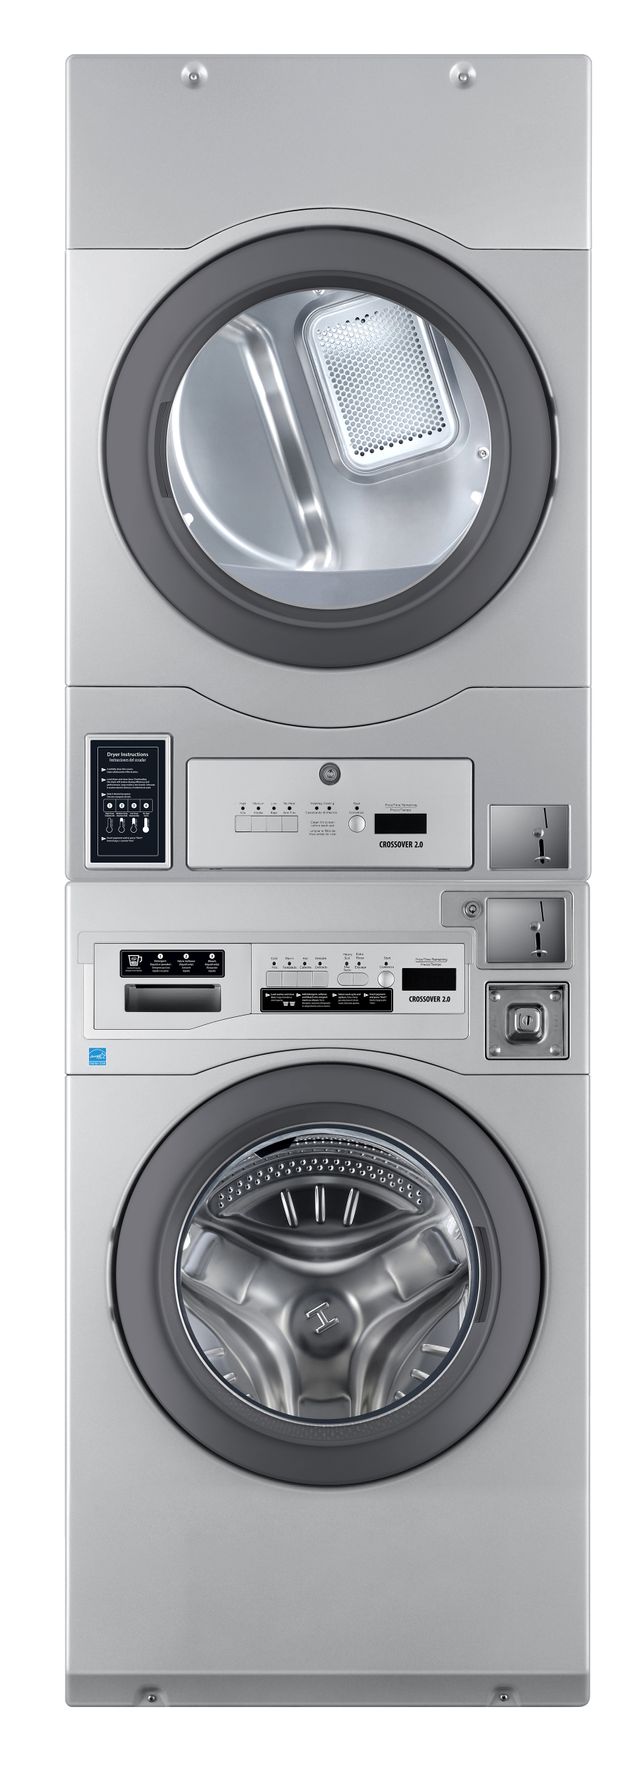 Crossover True Commercial Laundry - 7.0 Cu. Ft. Silver Heavy Duty Bottom Control Electric Dryer with Coin Option/Card Ready Included (Stacked application) 1